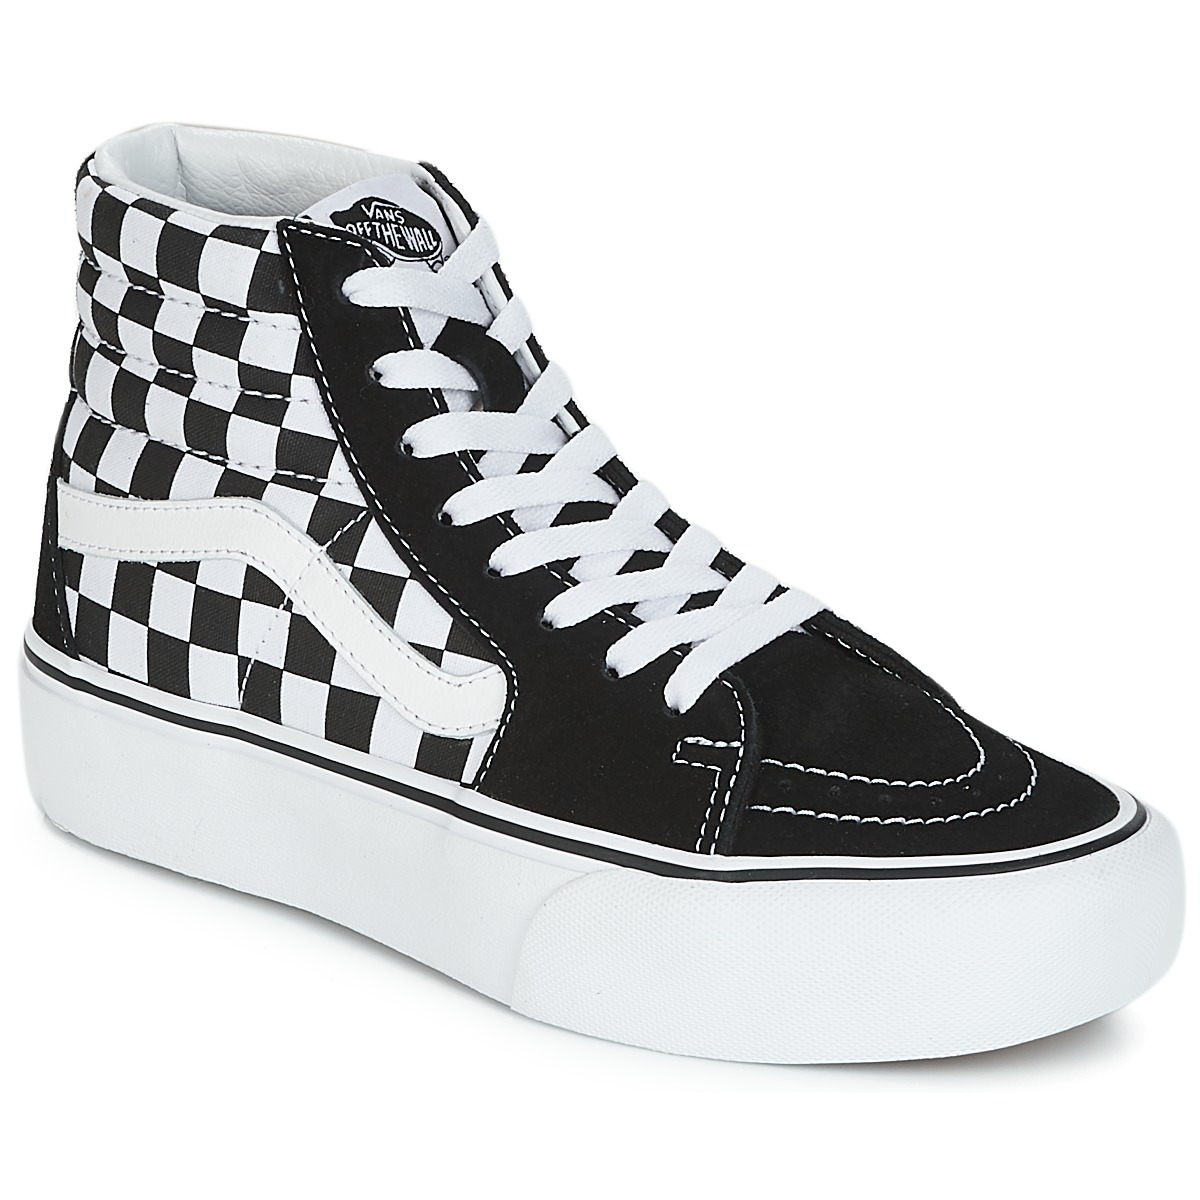 vans sk8 hi trainers in black with large logo